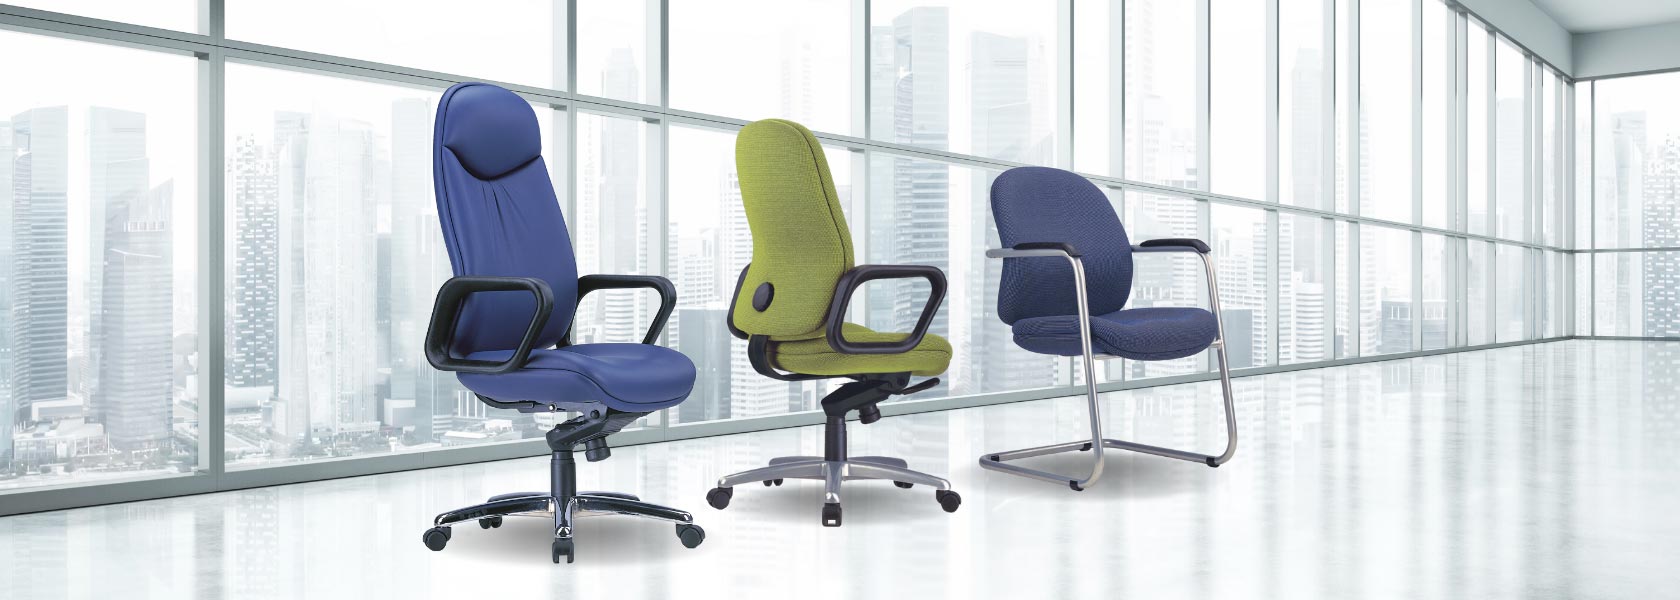 Anatom chairs in an office floor